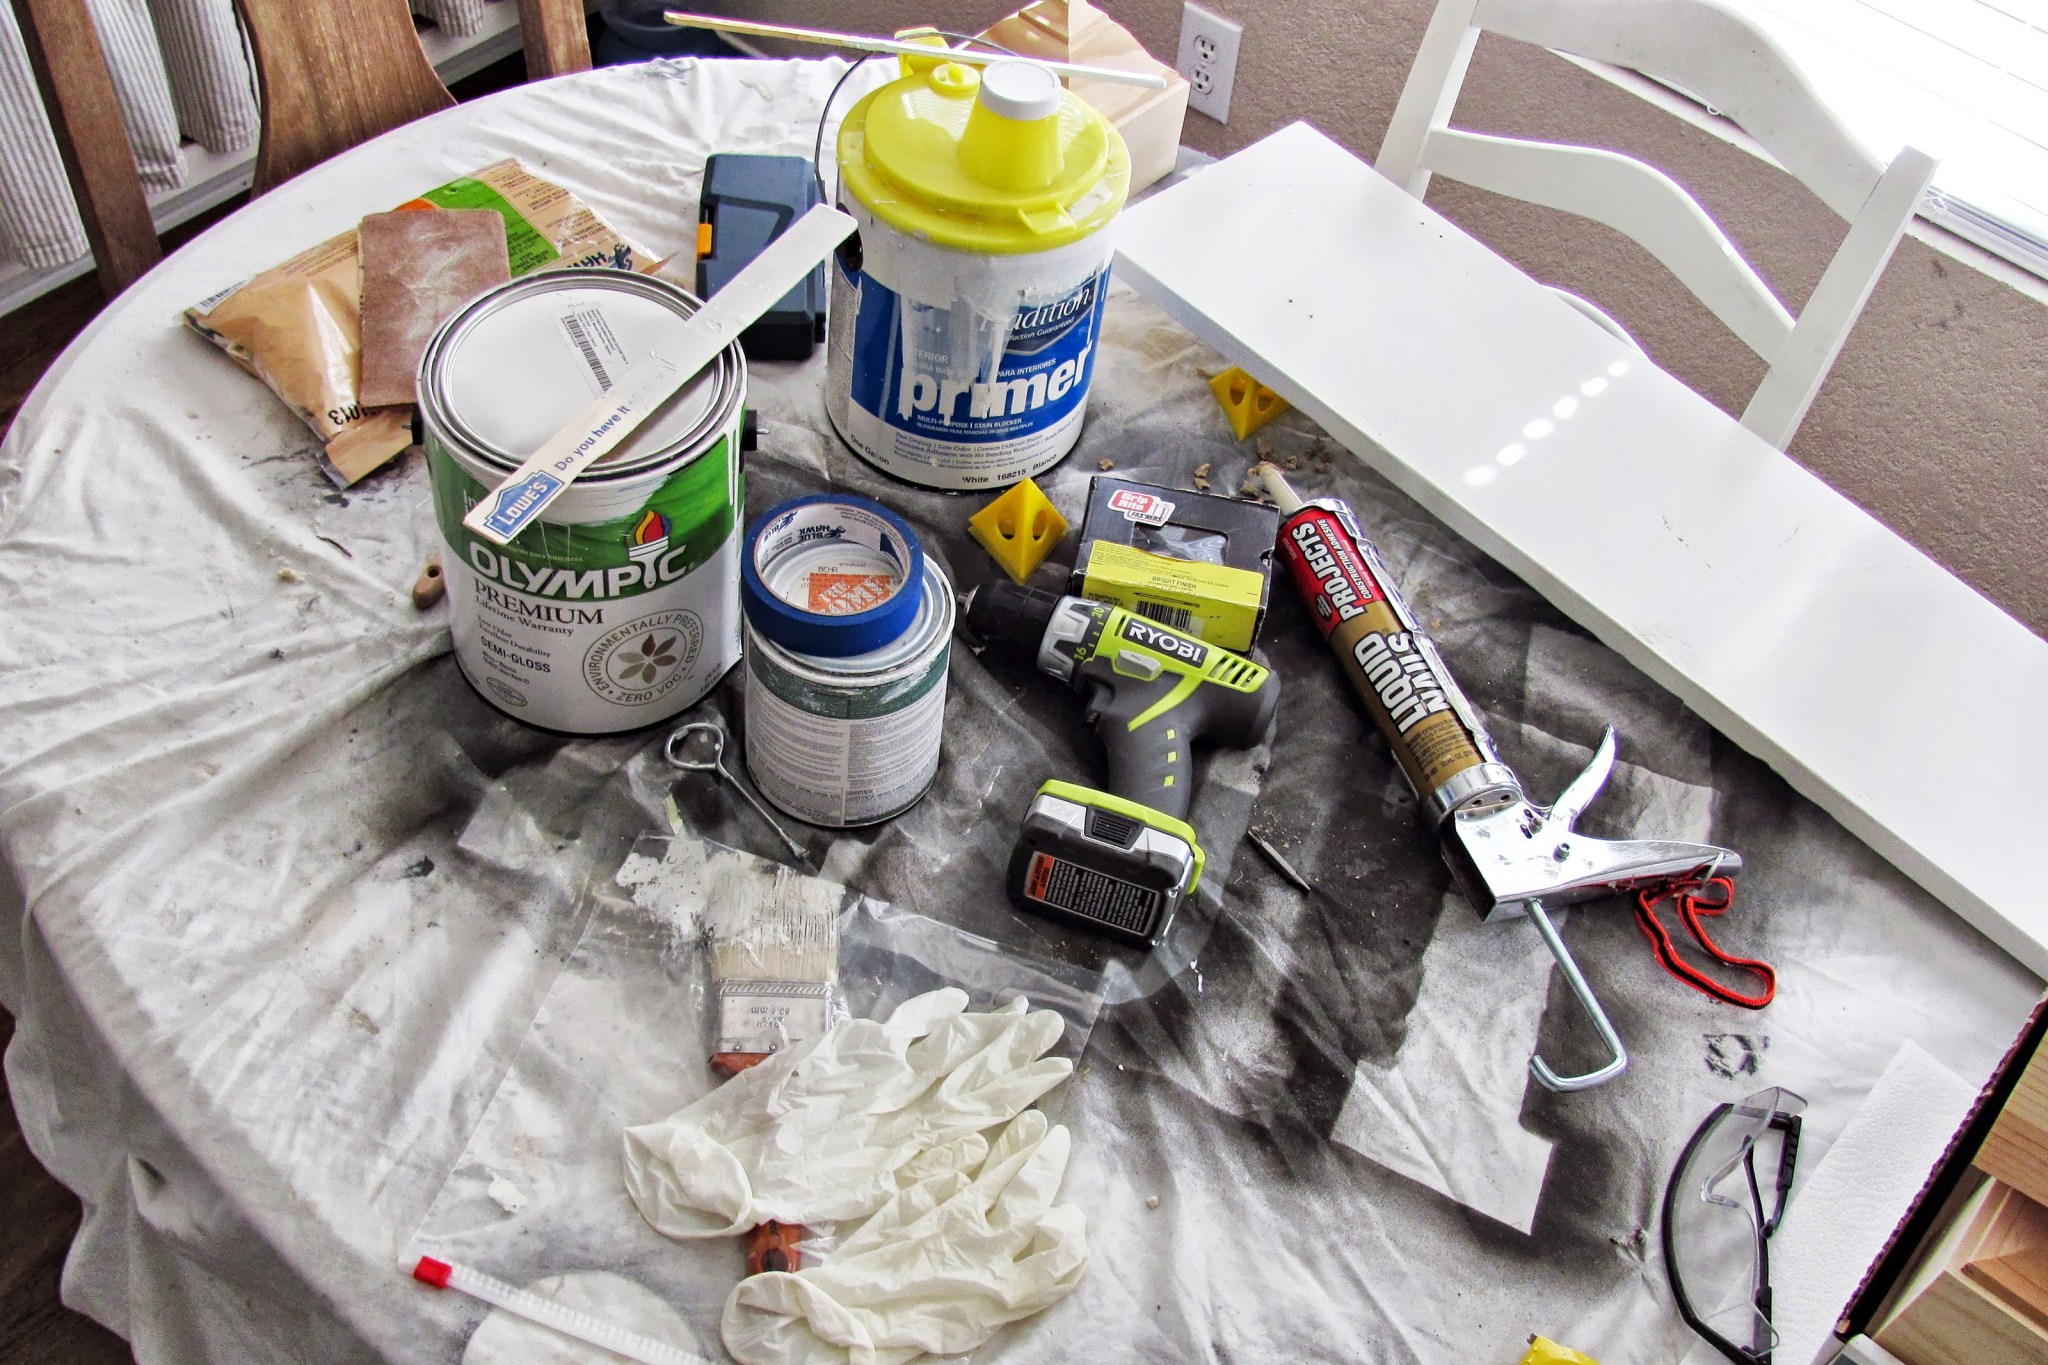 Caulk and other home maintenance products on a table